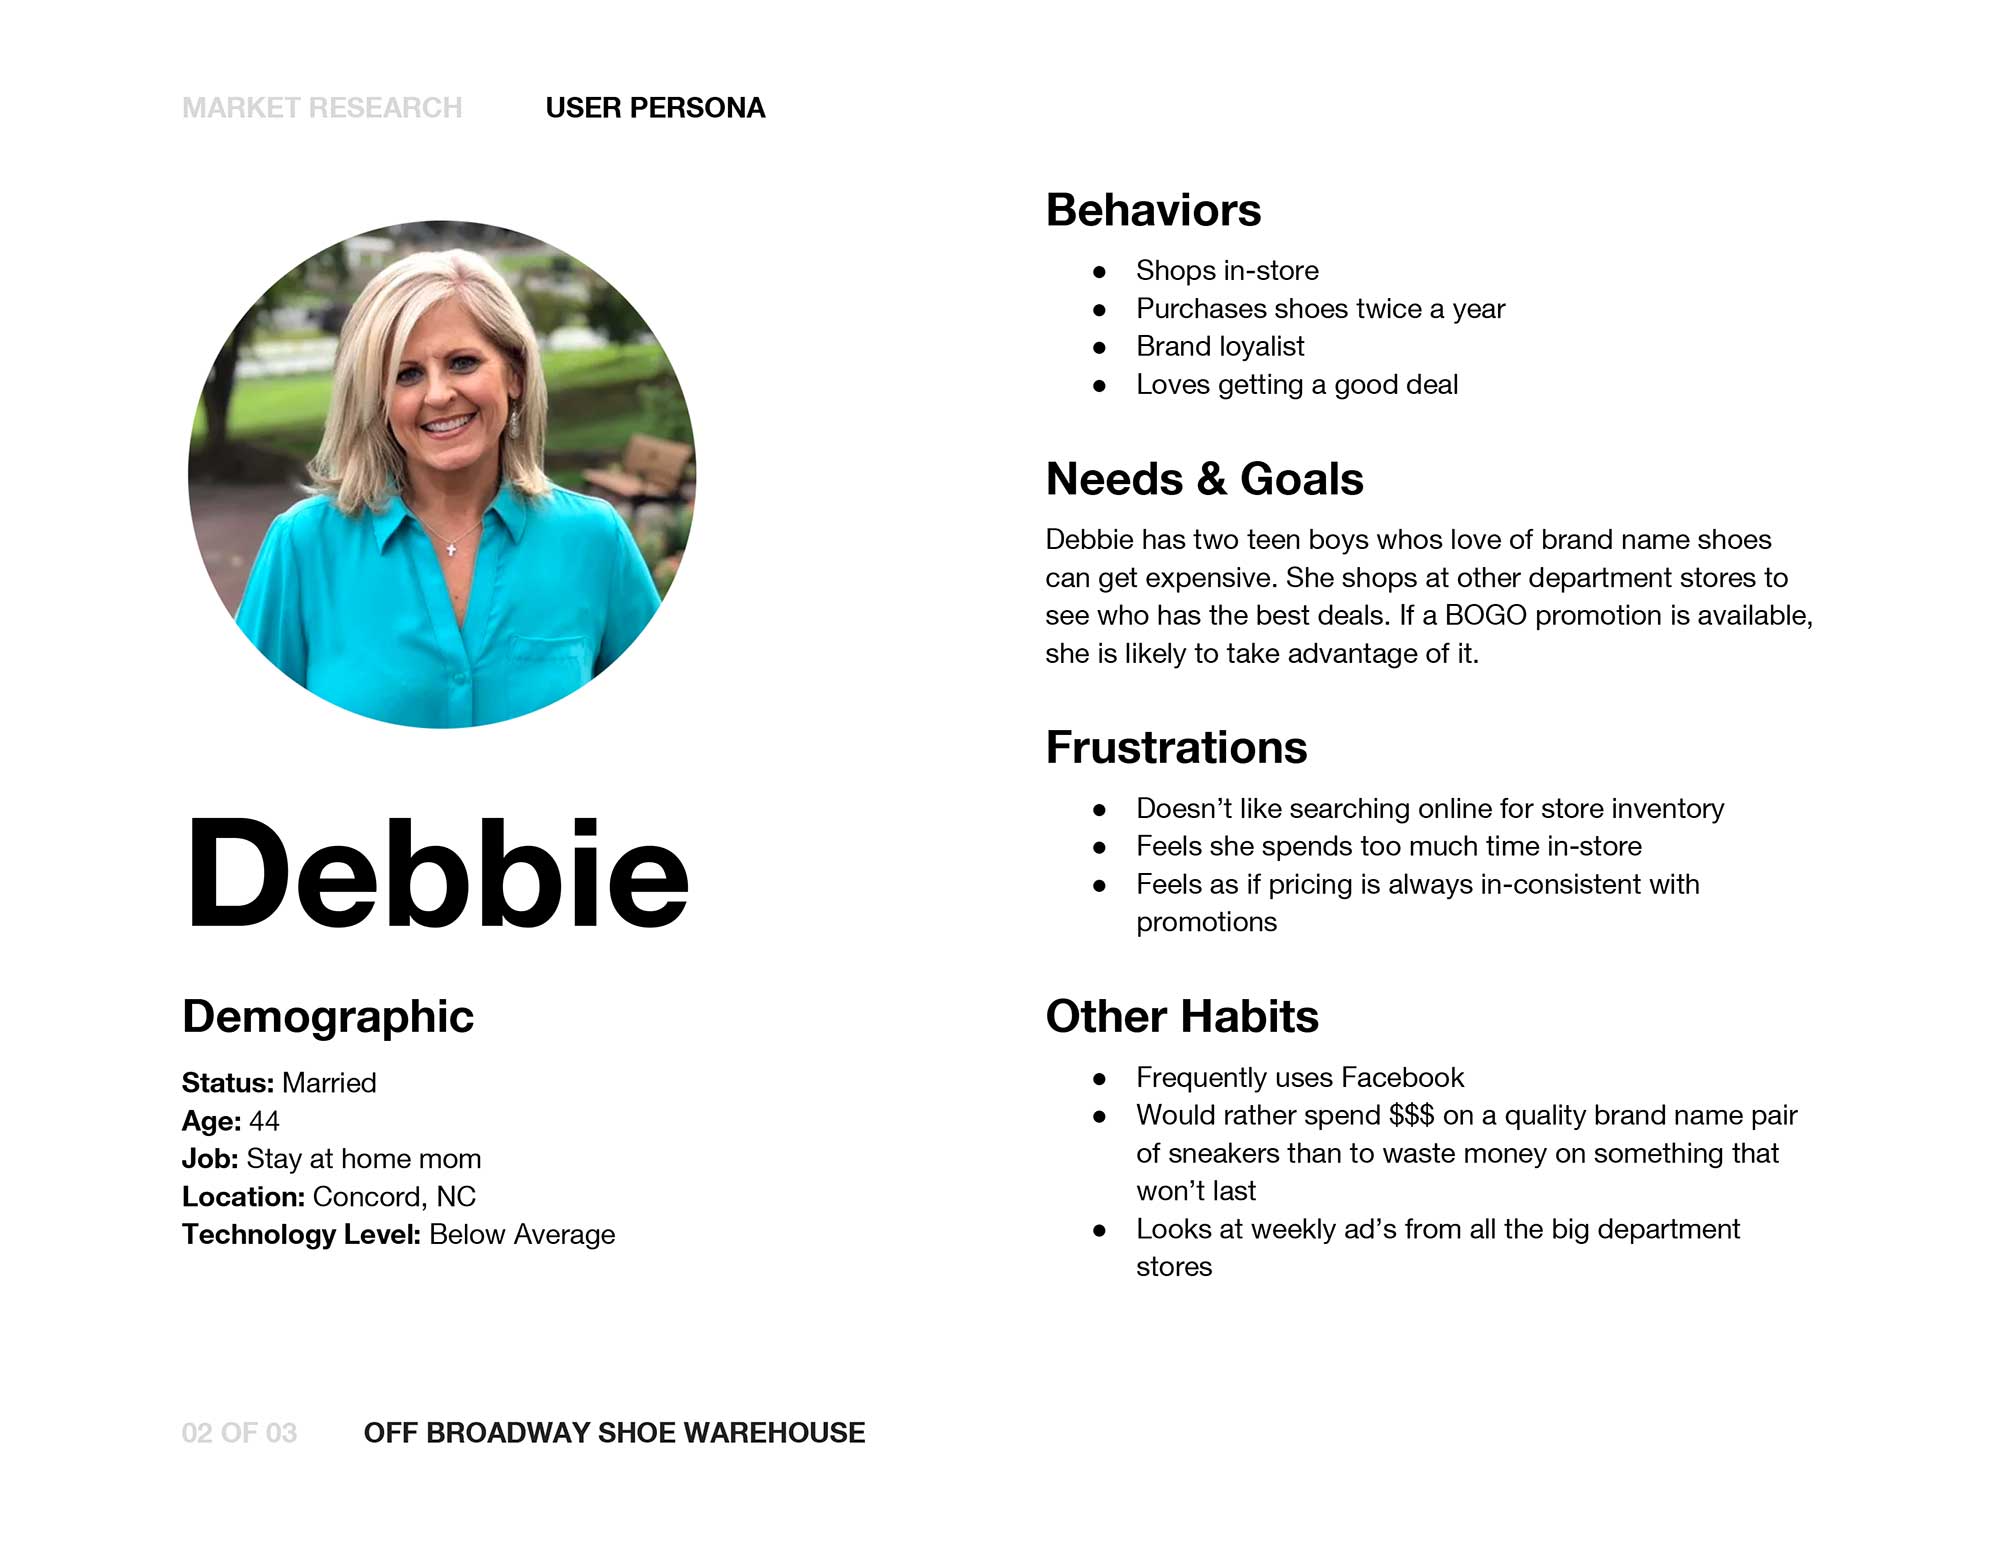 a user persona of a woman named debbie